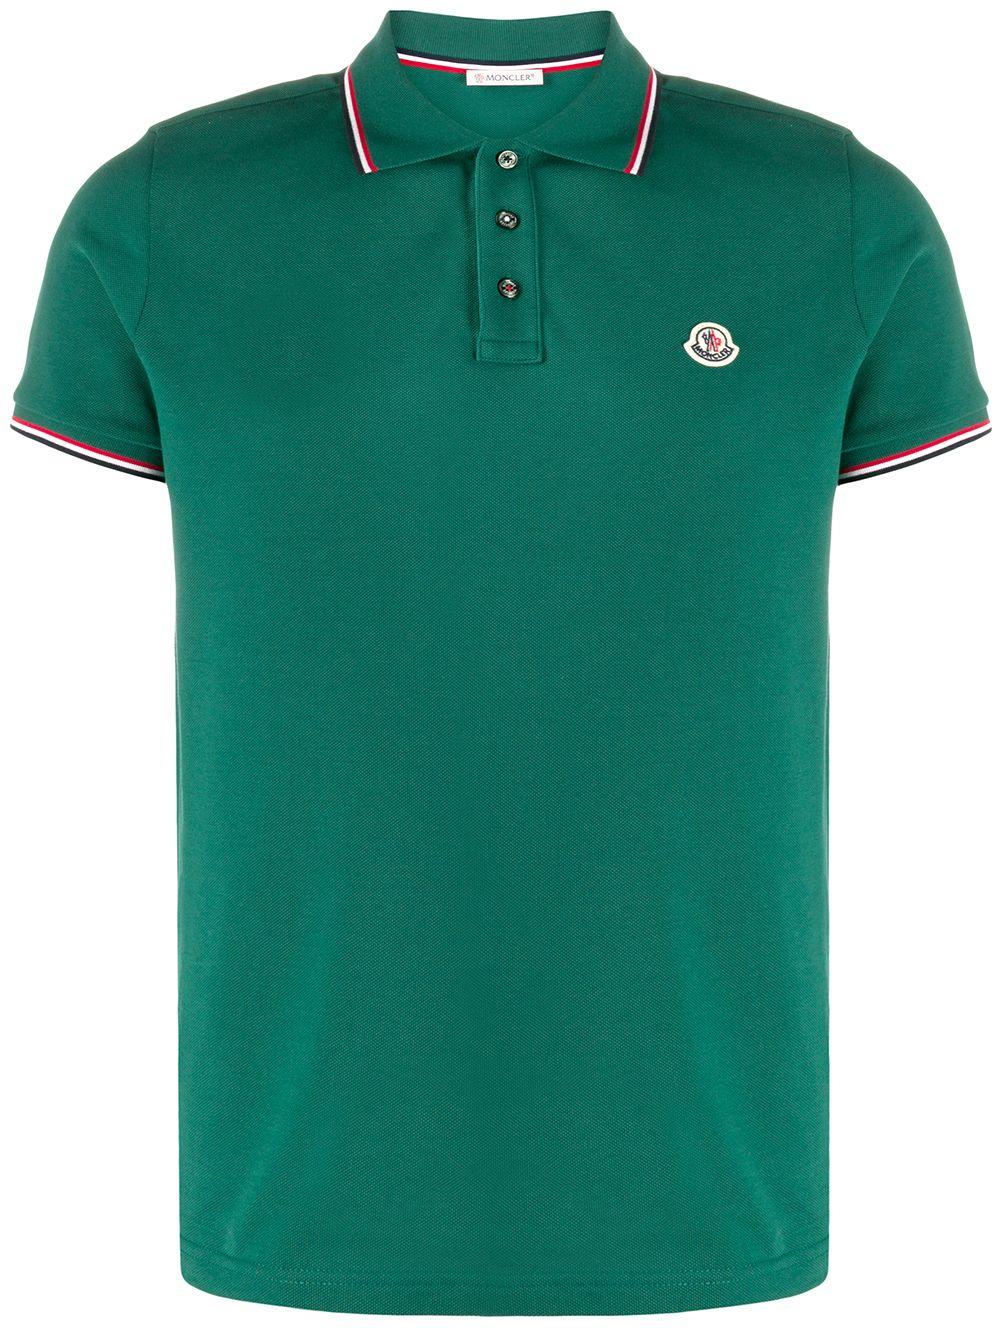 Moncler Cotton Logo Patch Polo Shirt in Green for Men - Lyst